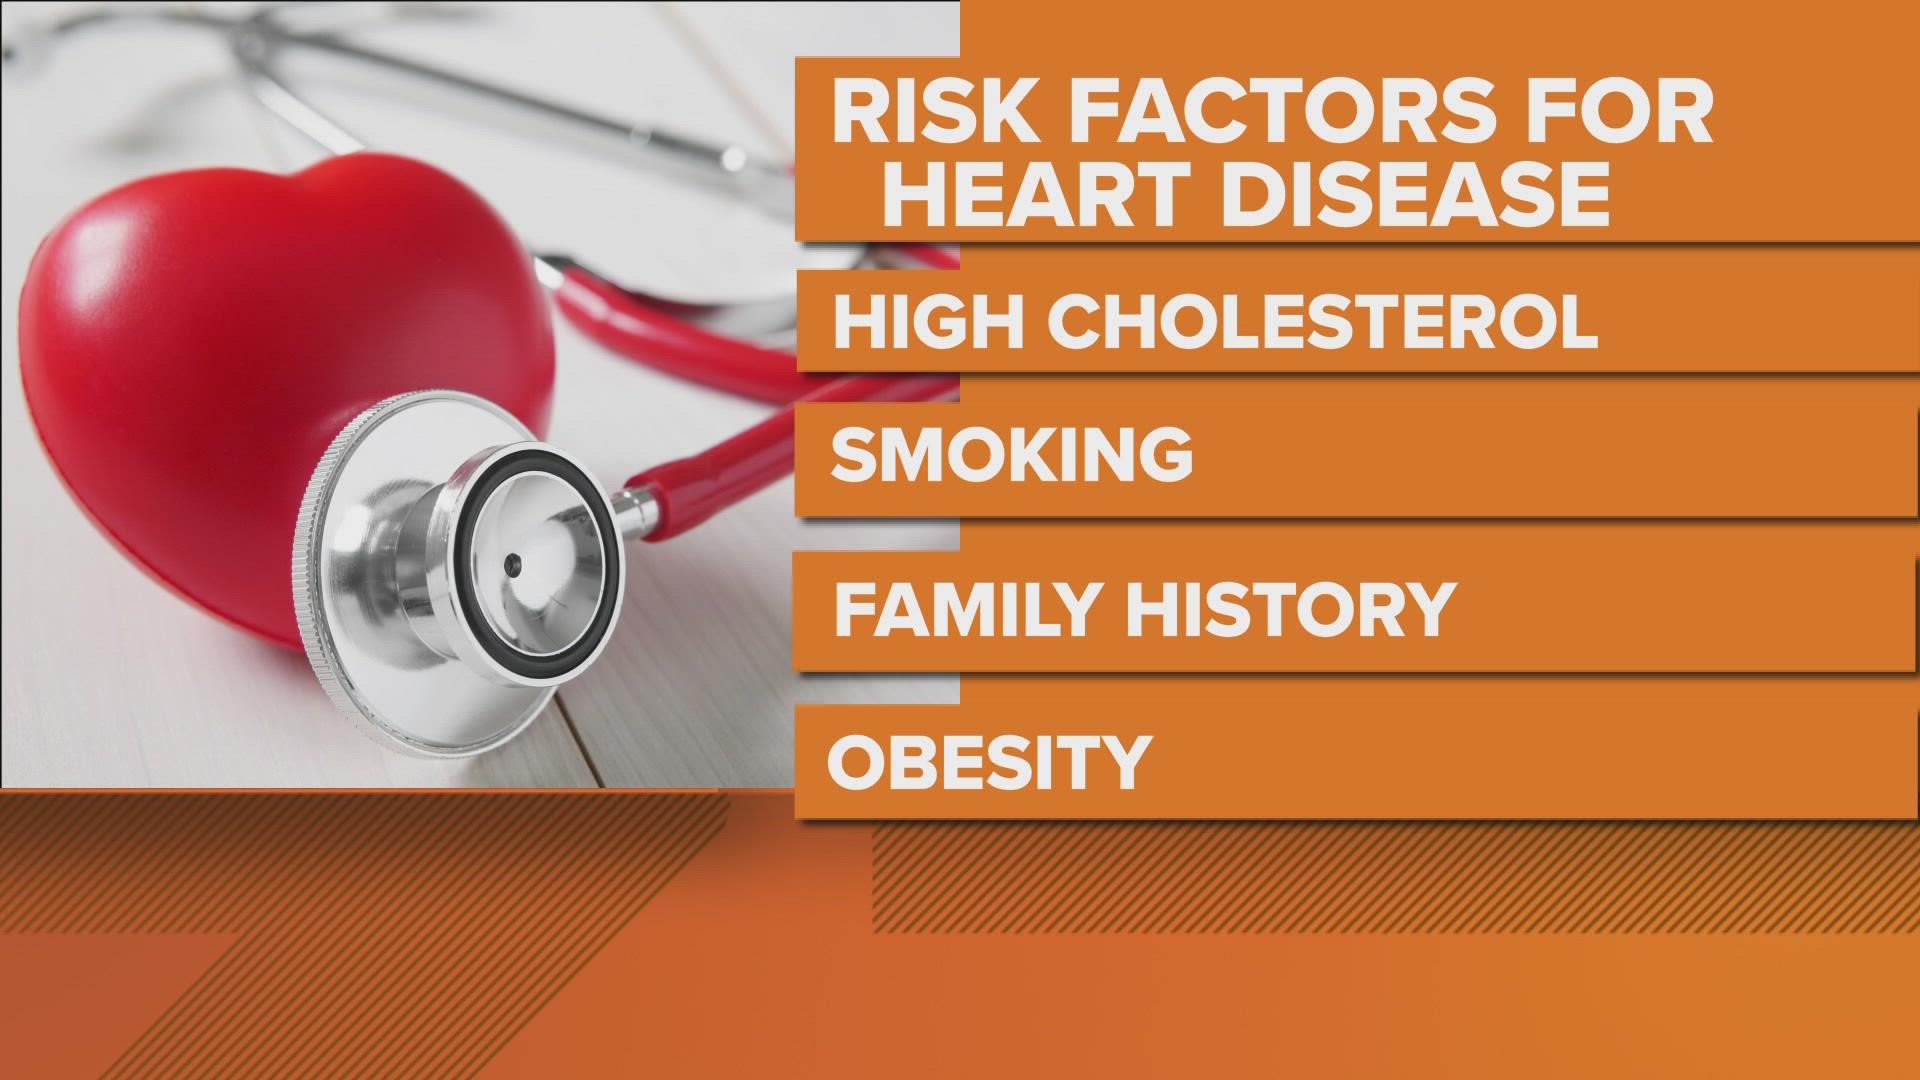 Heart disease is the No. 1 killer in the U.S. Some of the risk factors are high cholesterol, smoking, family history, obesity and an unhealthy diet.